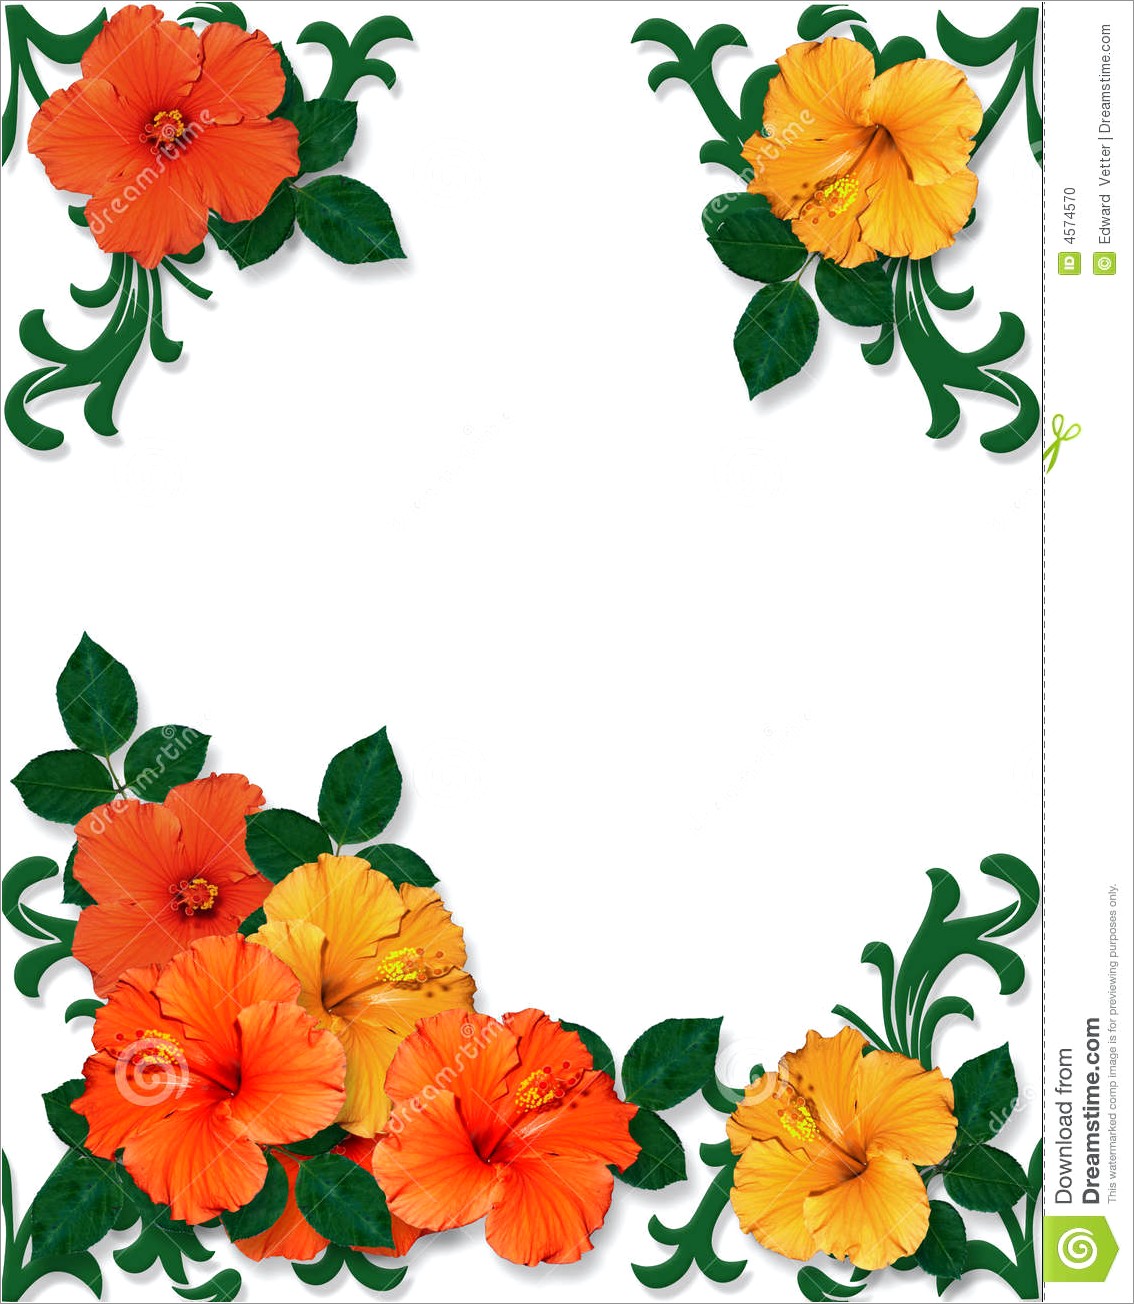 Floral Images For Invitations